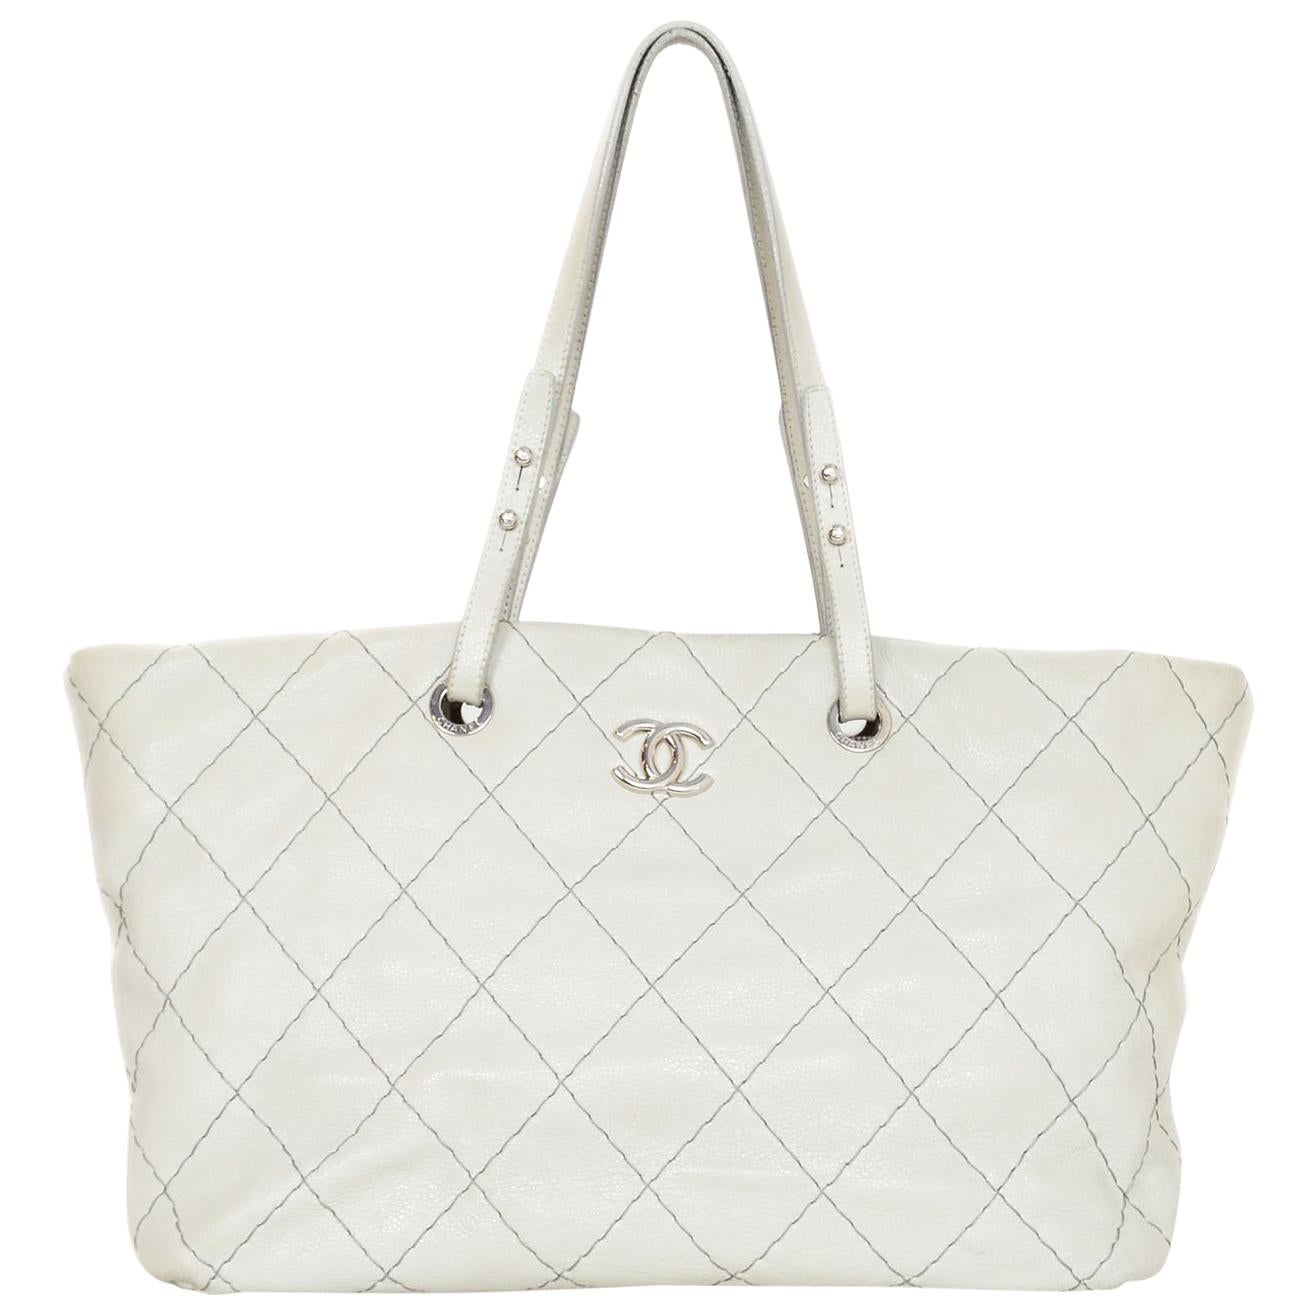 Chanel Off-White Glazed Calfskin Large On The Road Tote Bag